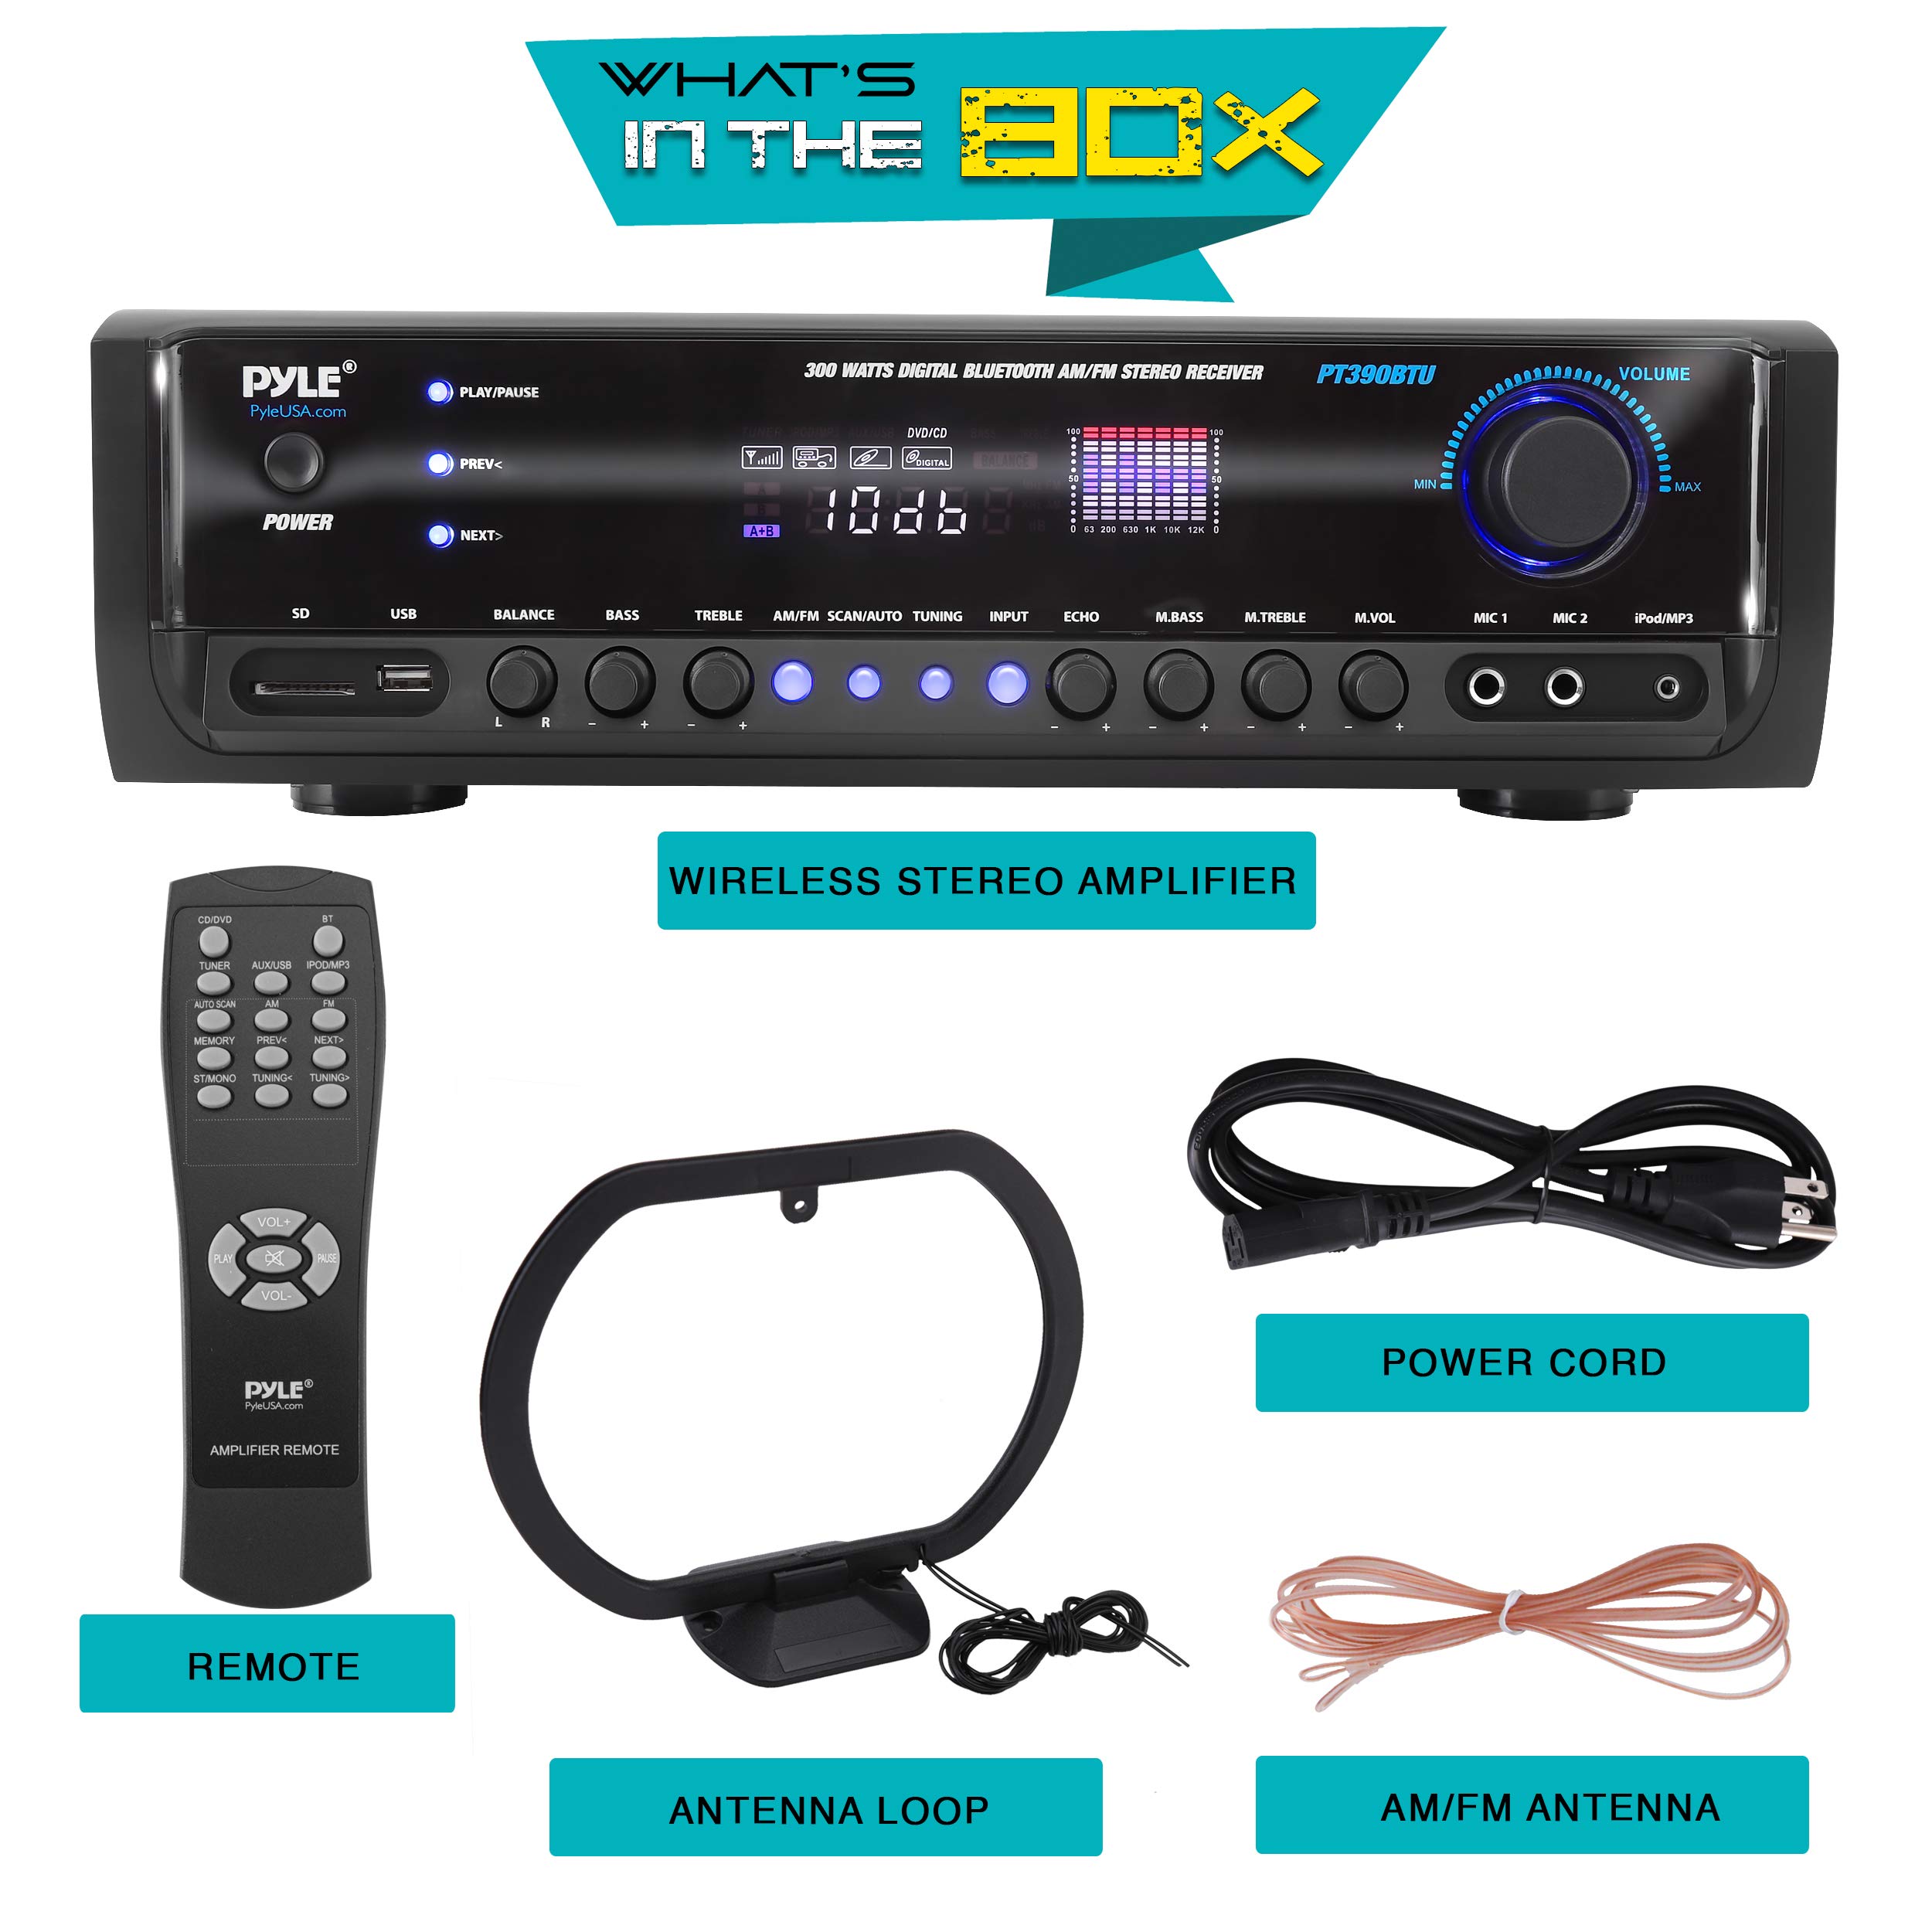 Pyle Wireless Bluetooth Power Amplifier System 300W 4 Channel Home Theater Audio Stereo Sound Receiver Box Entertainment w/ USB, RCA, 3.5mm AUX, LED, Remote for Speaker, PA, Studio- PT390BTU,BLACK